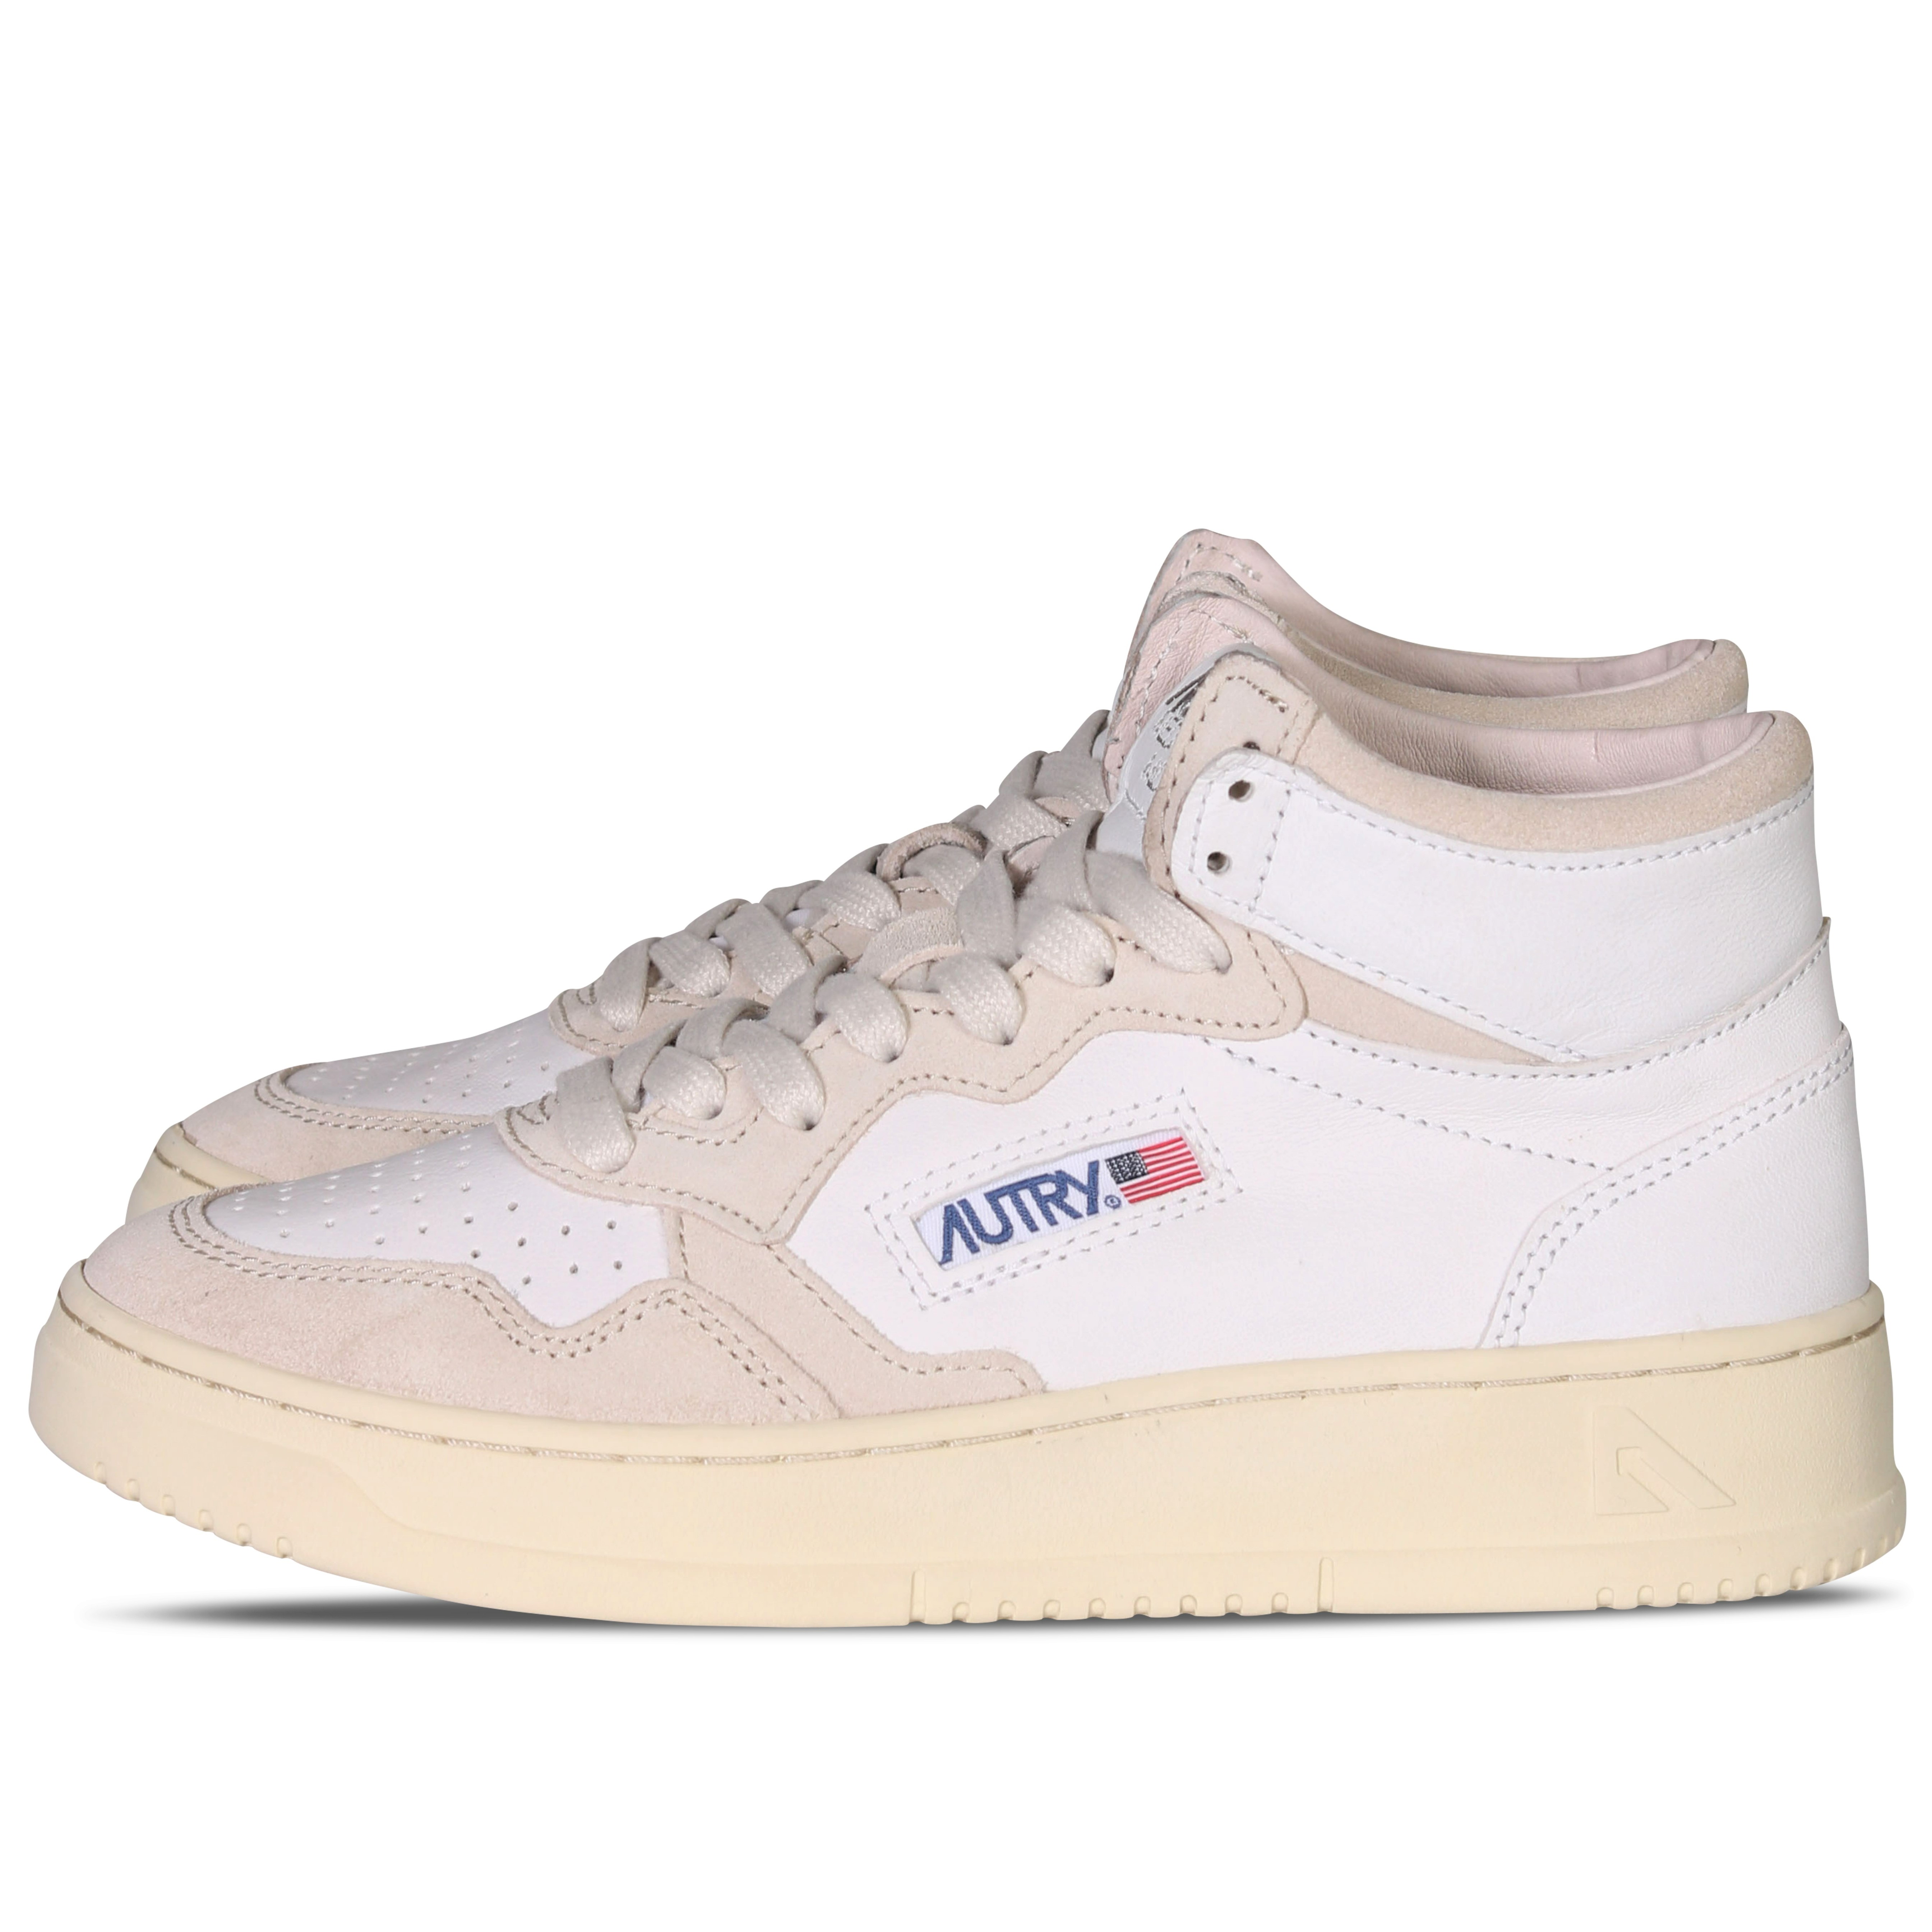 Autry Action Shoes Mid Sneaker Goat/Suede 36